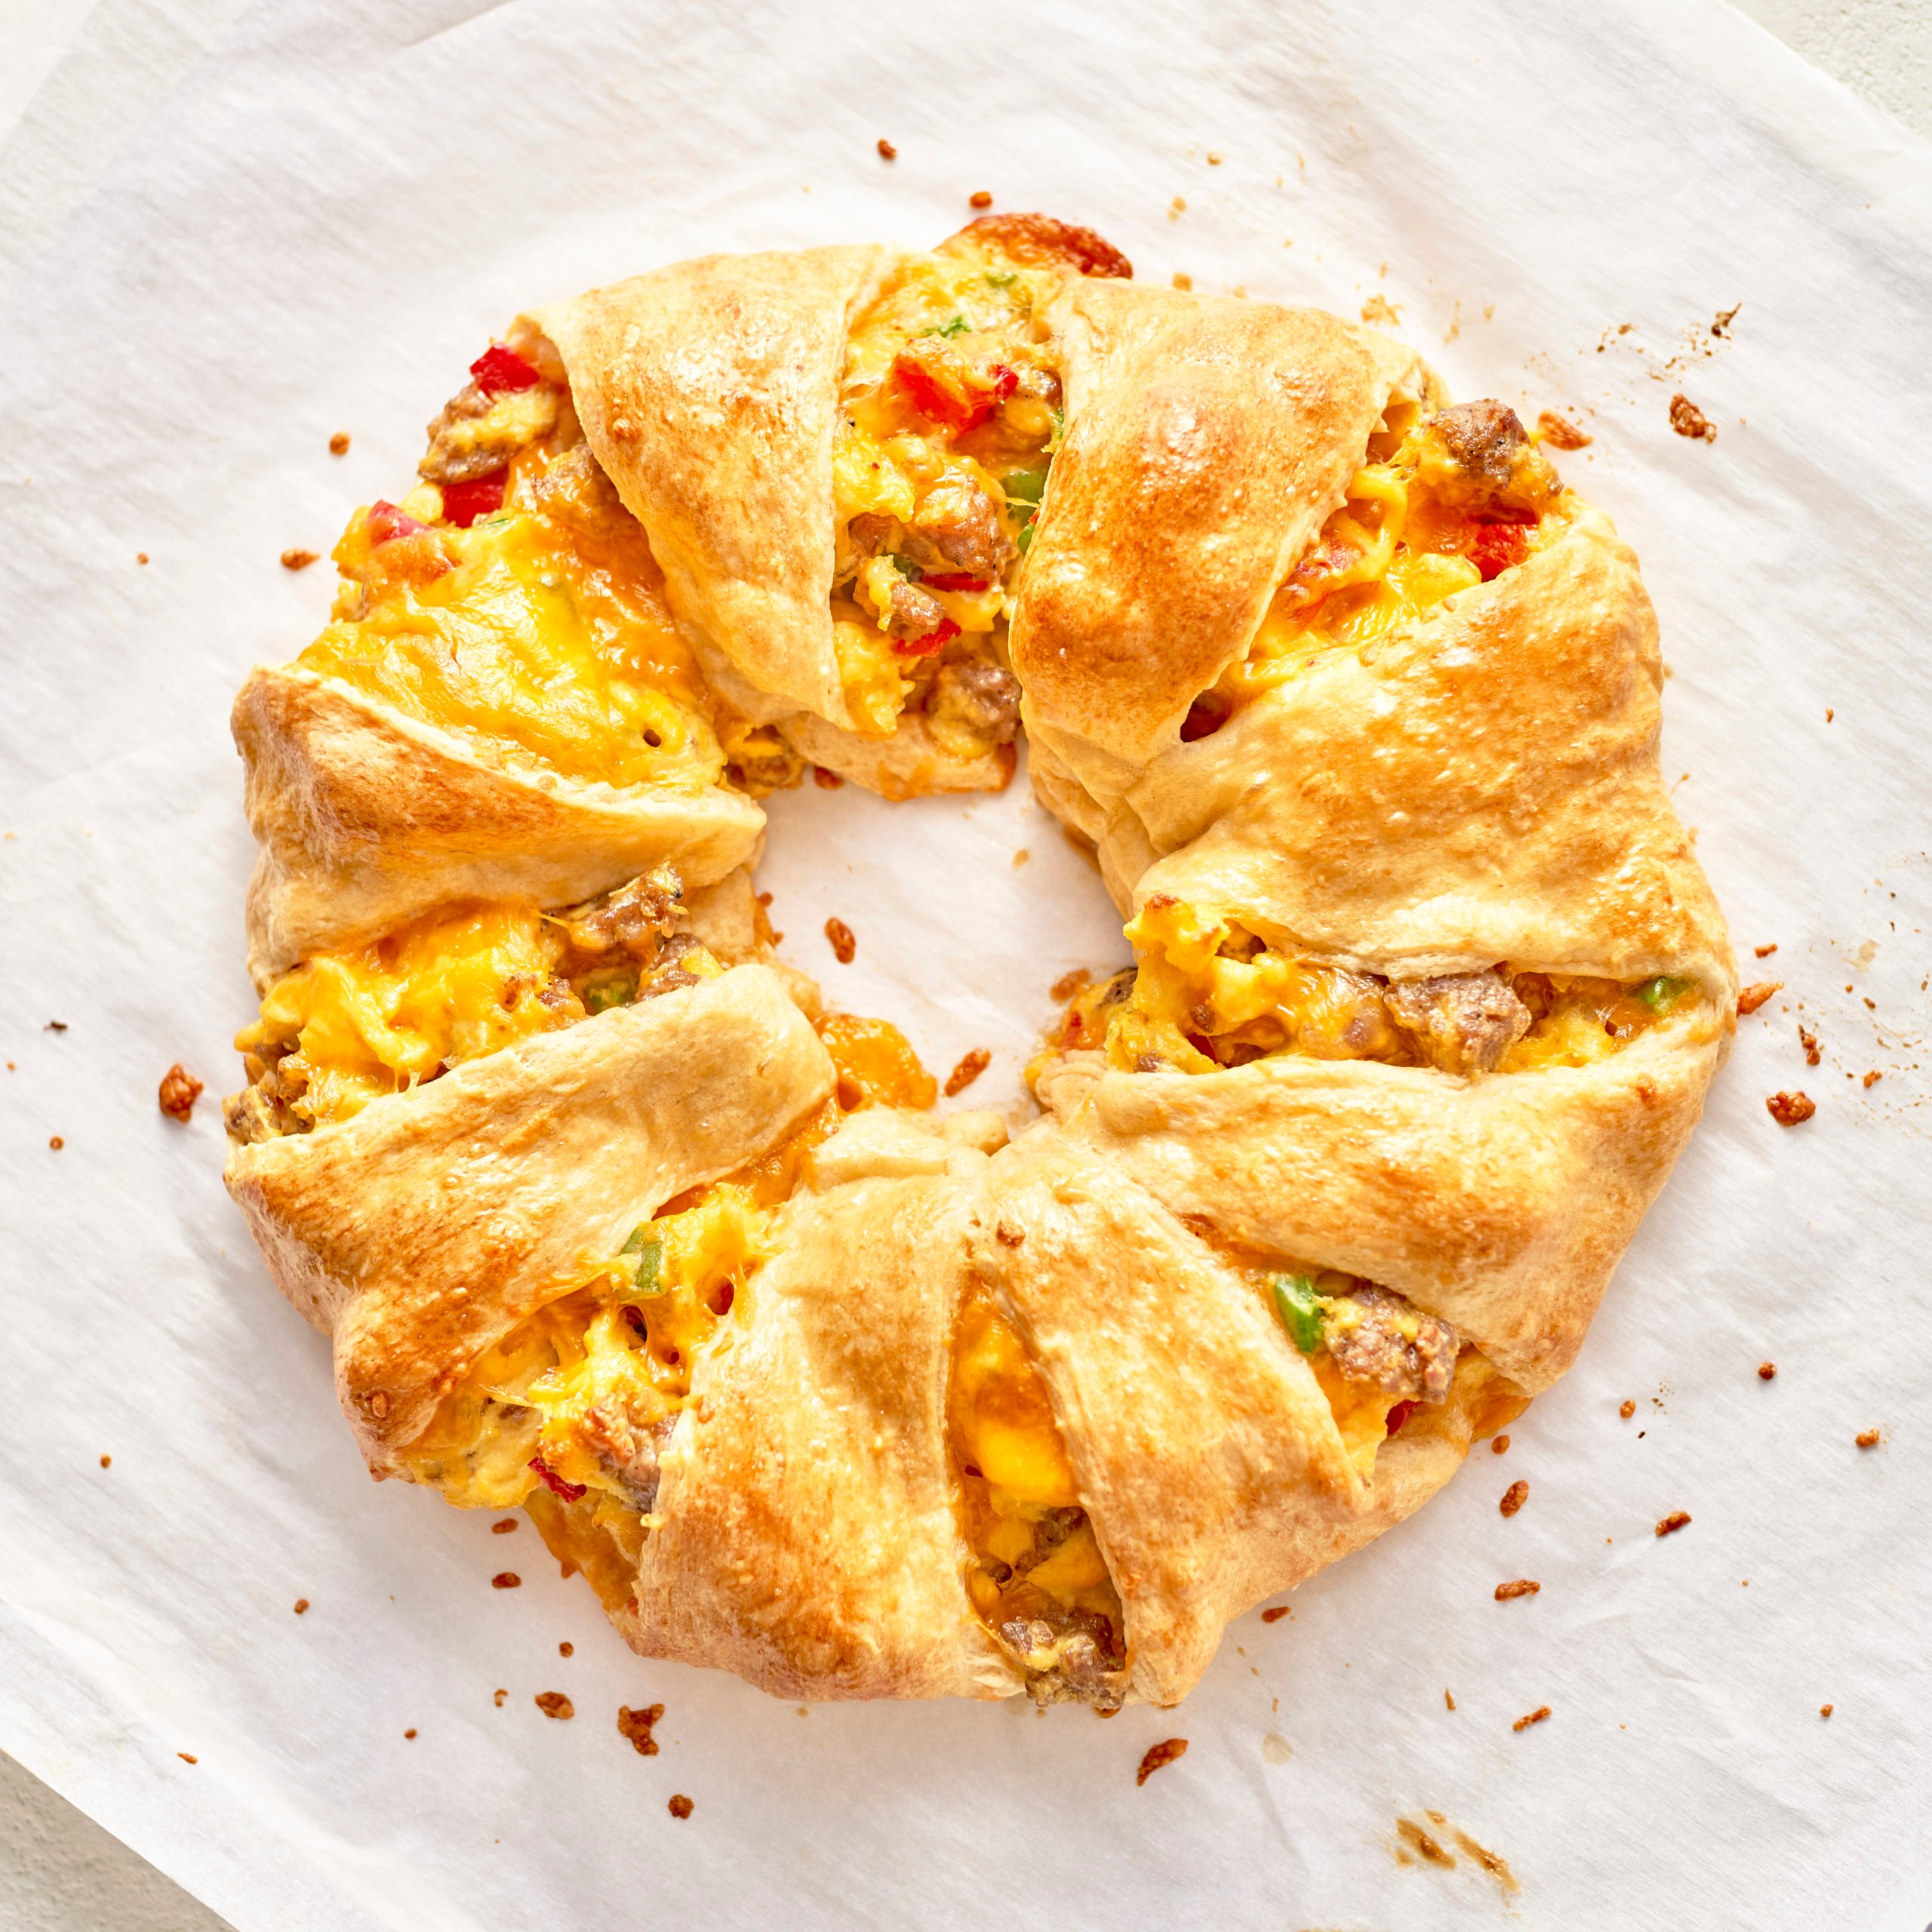 Sausage, Egg & Cheese Croissant Ring with Moink sausage